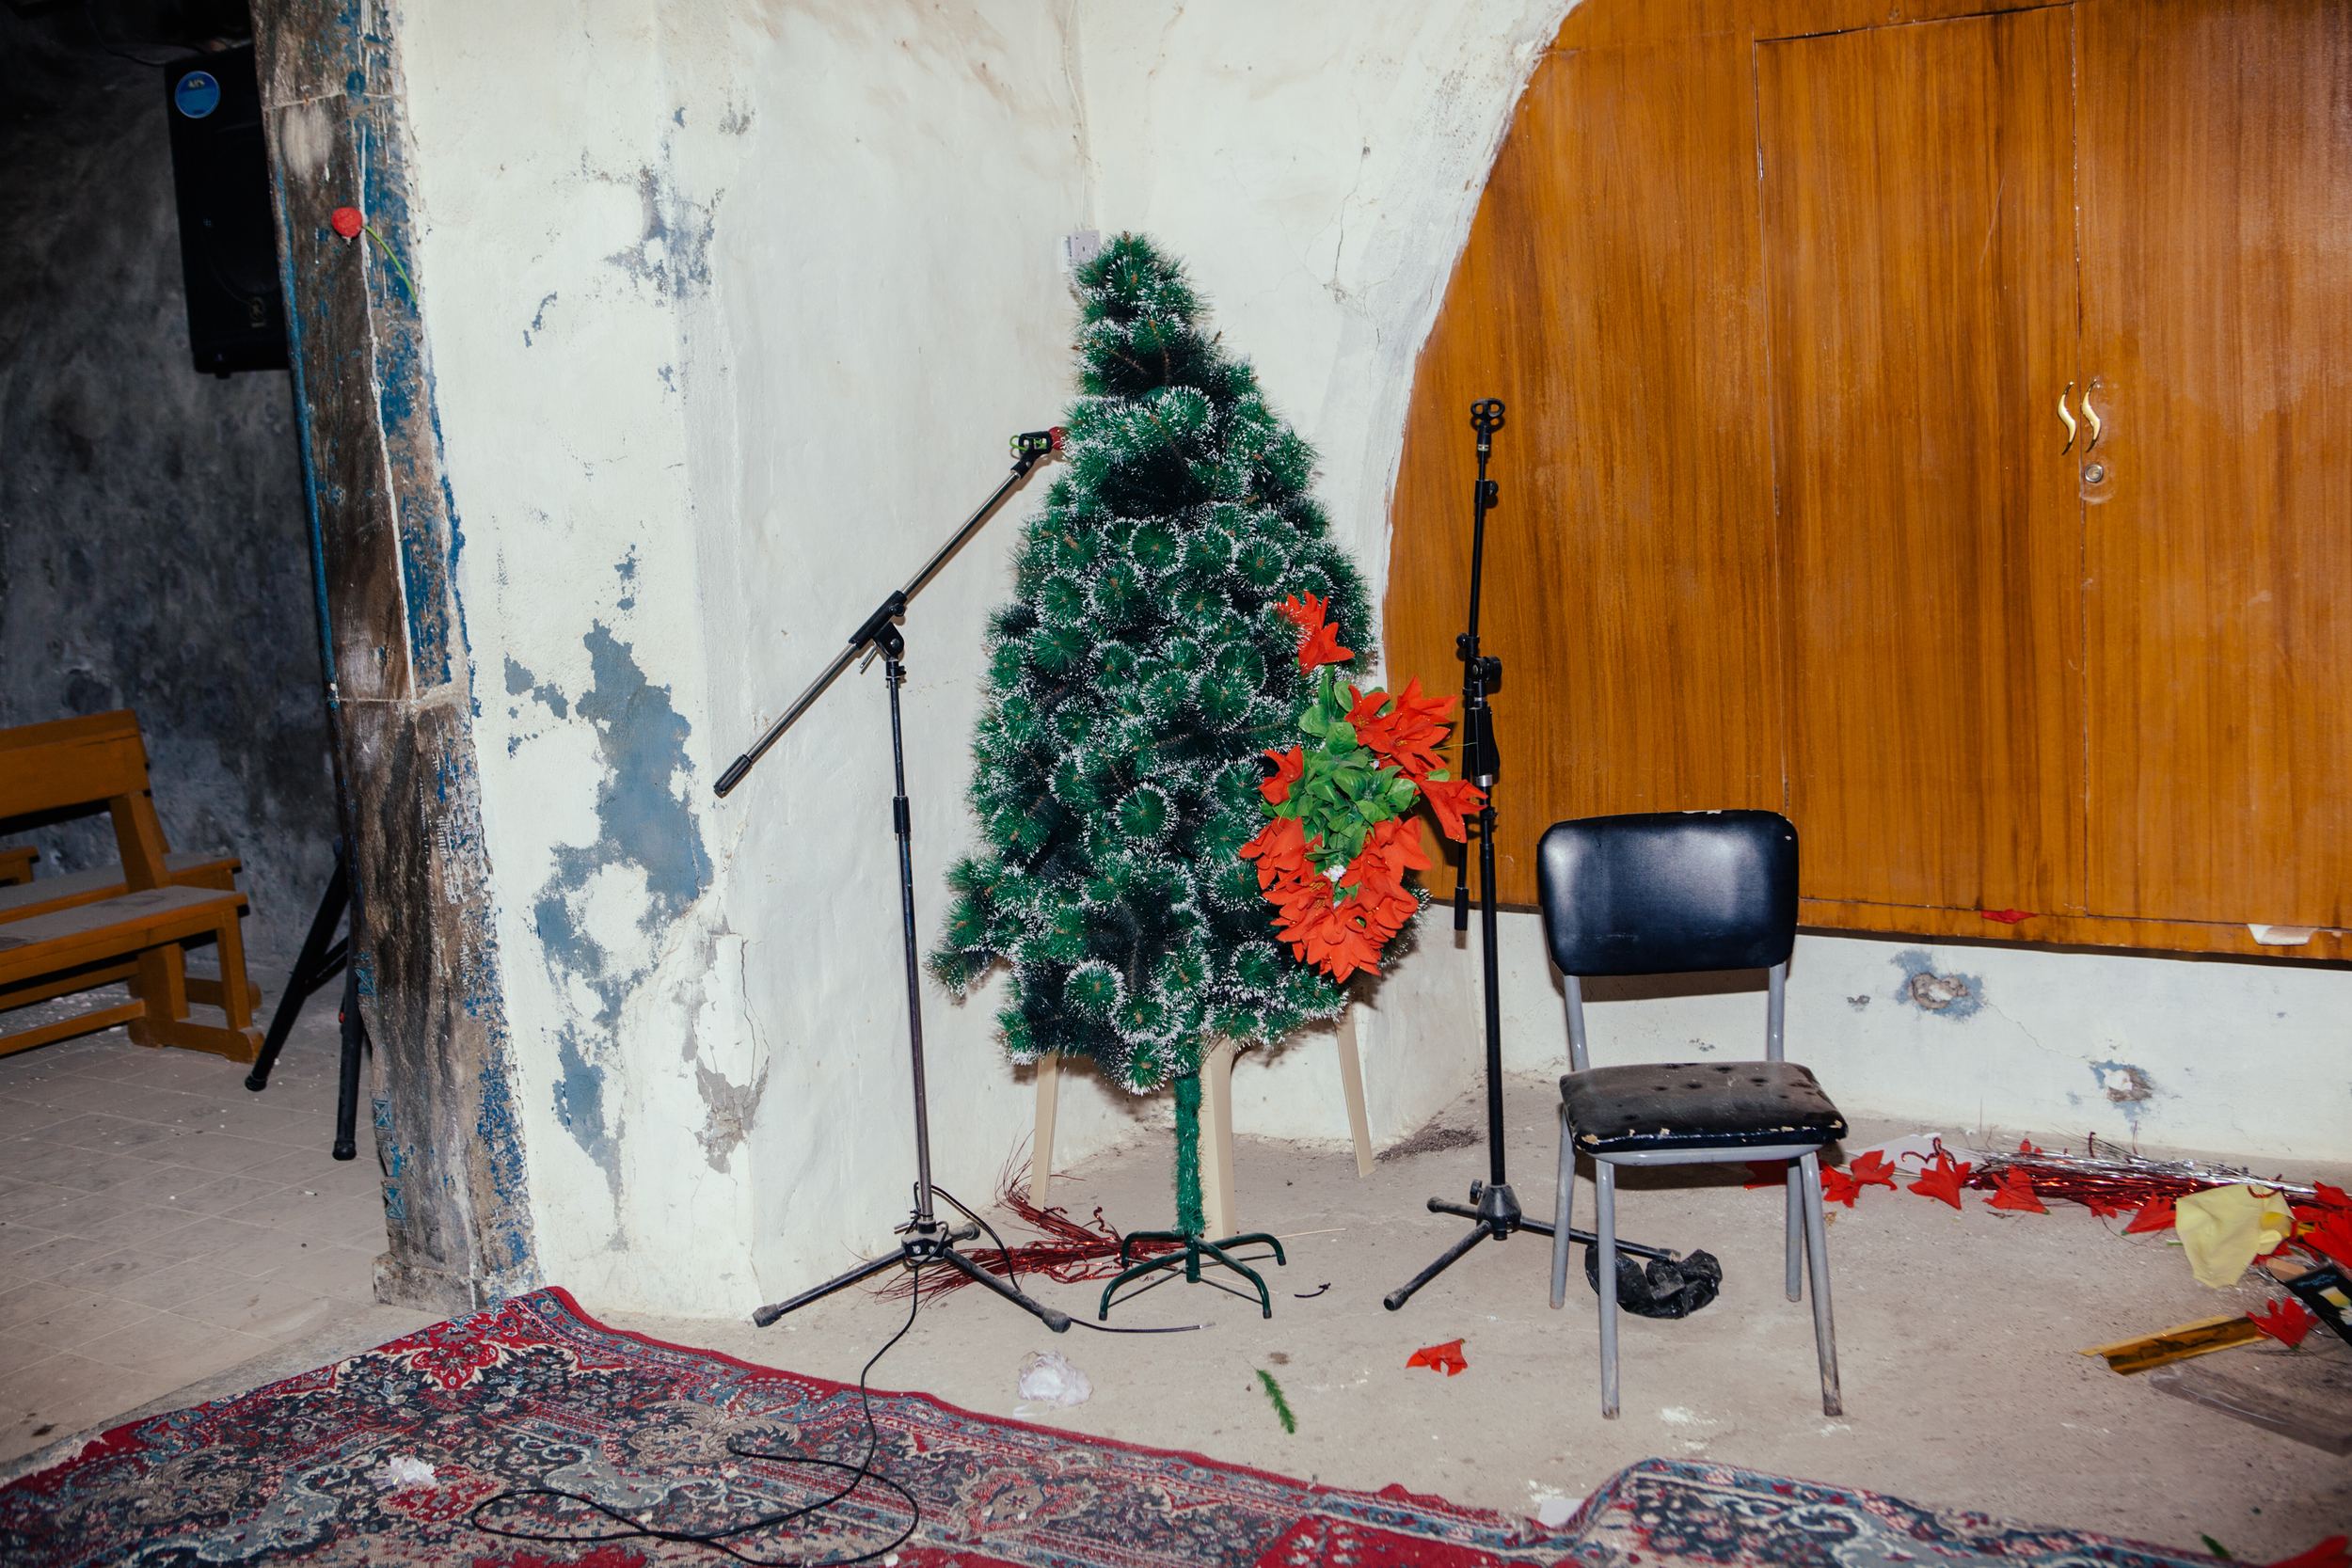  A Christmas tree at St. George's Chaldean church in the village of Baqofah, which was abandoned after it was attacked by ISIS militants.&nbsp;Northern Iraqi Kurdistan. 